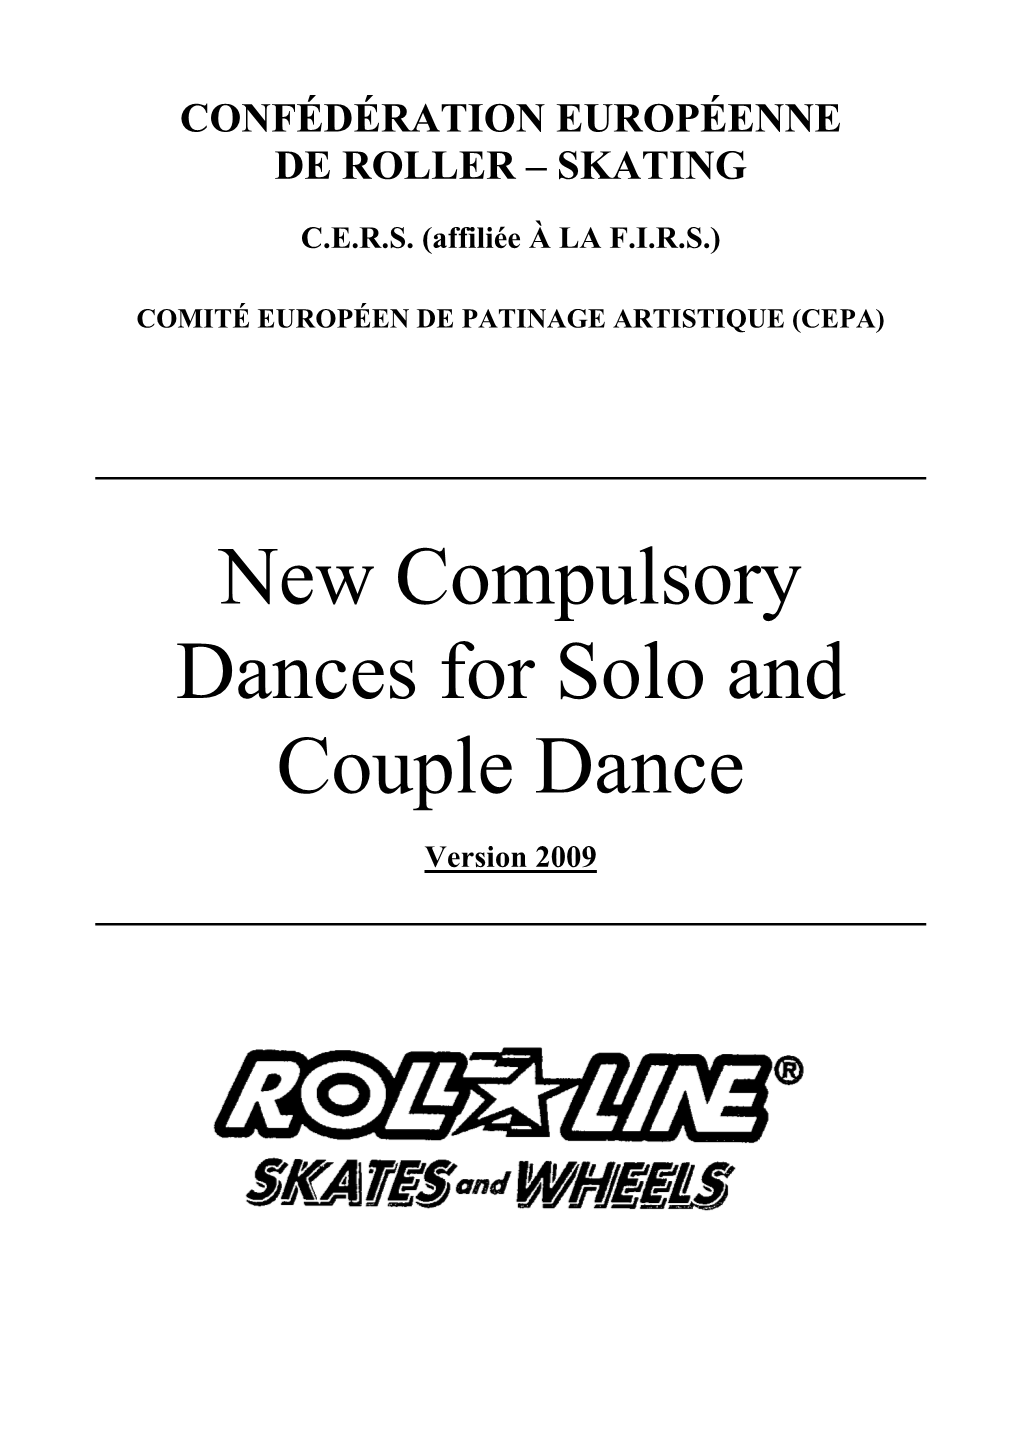 New Compulsory Dances for Solo and Couple Dance